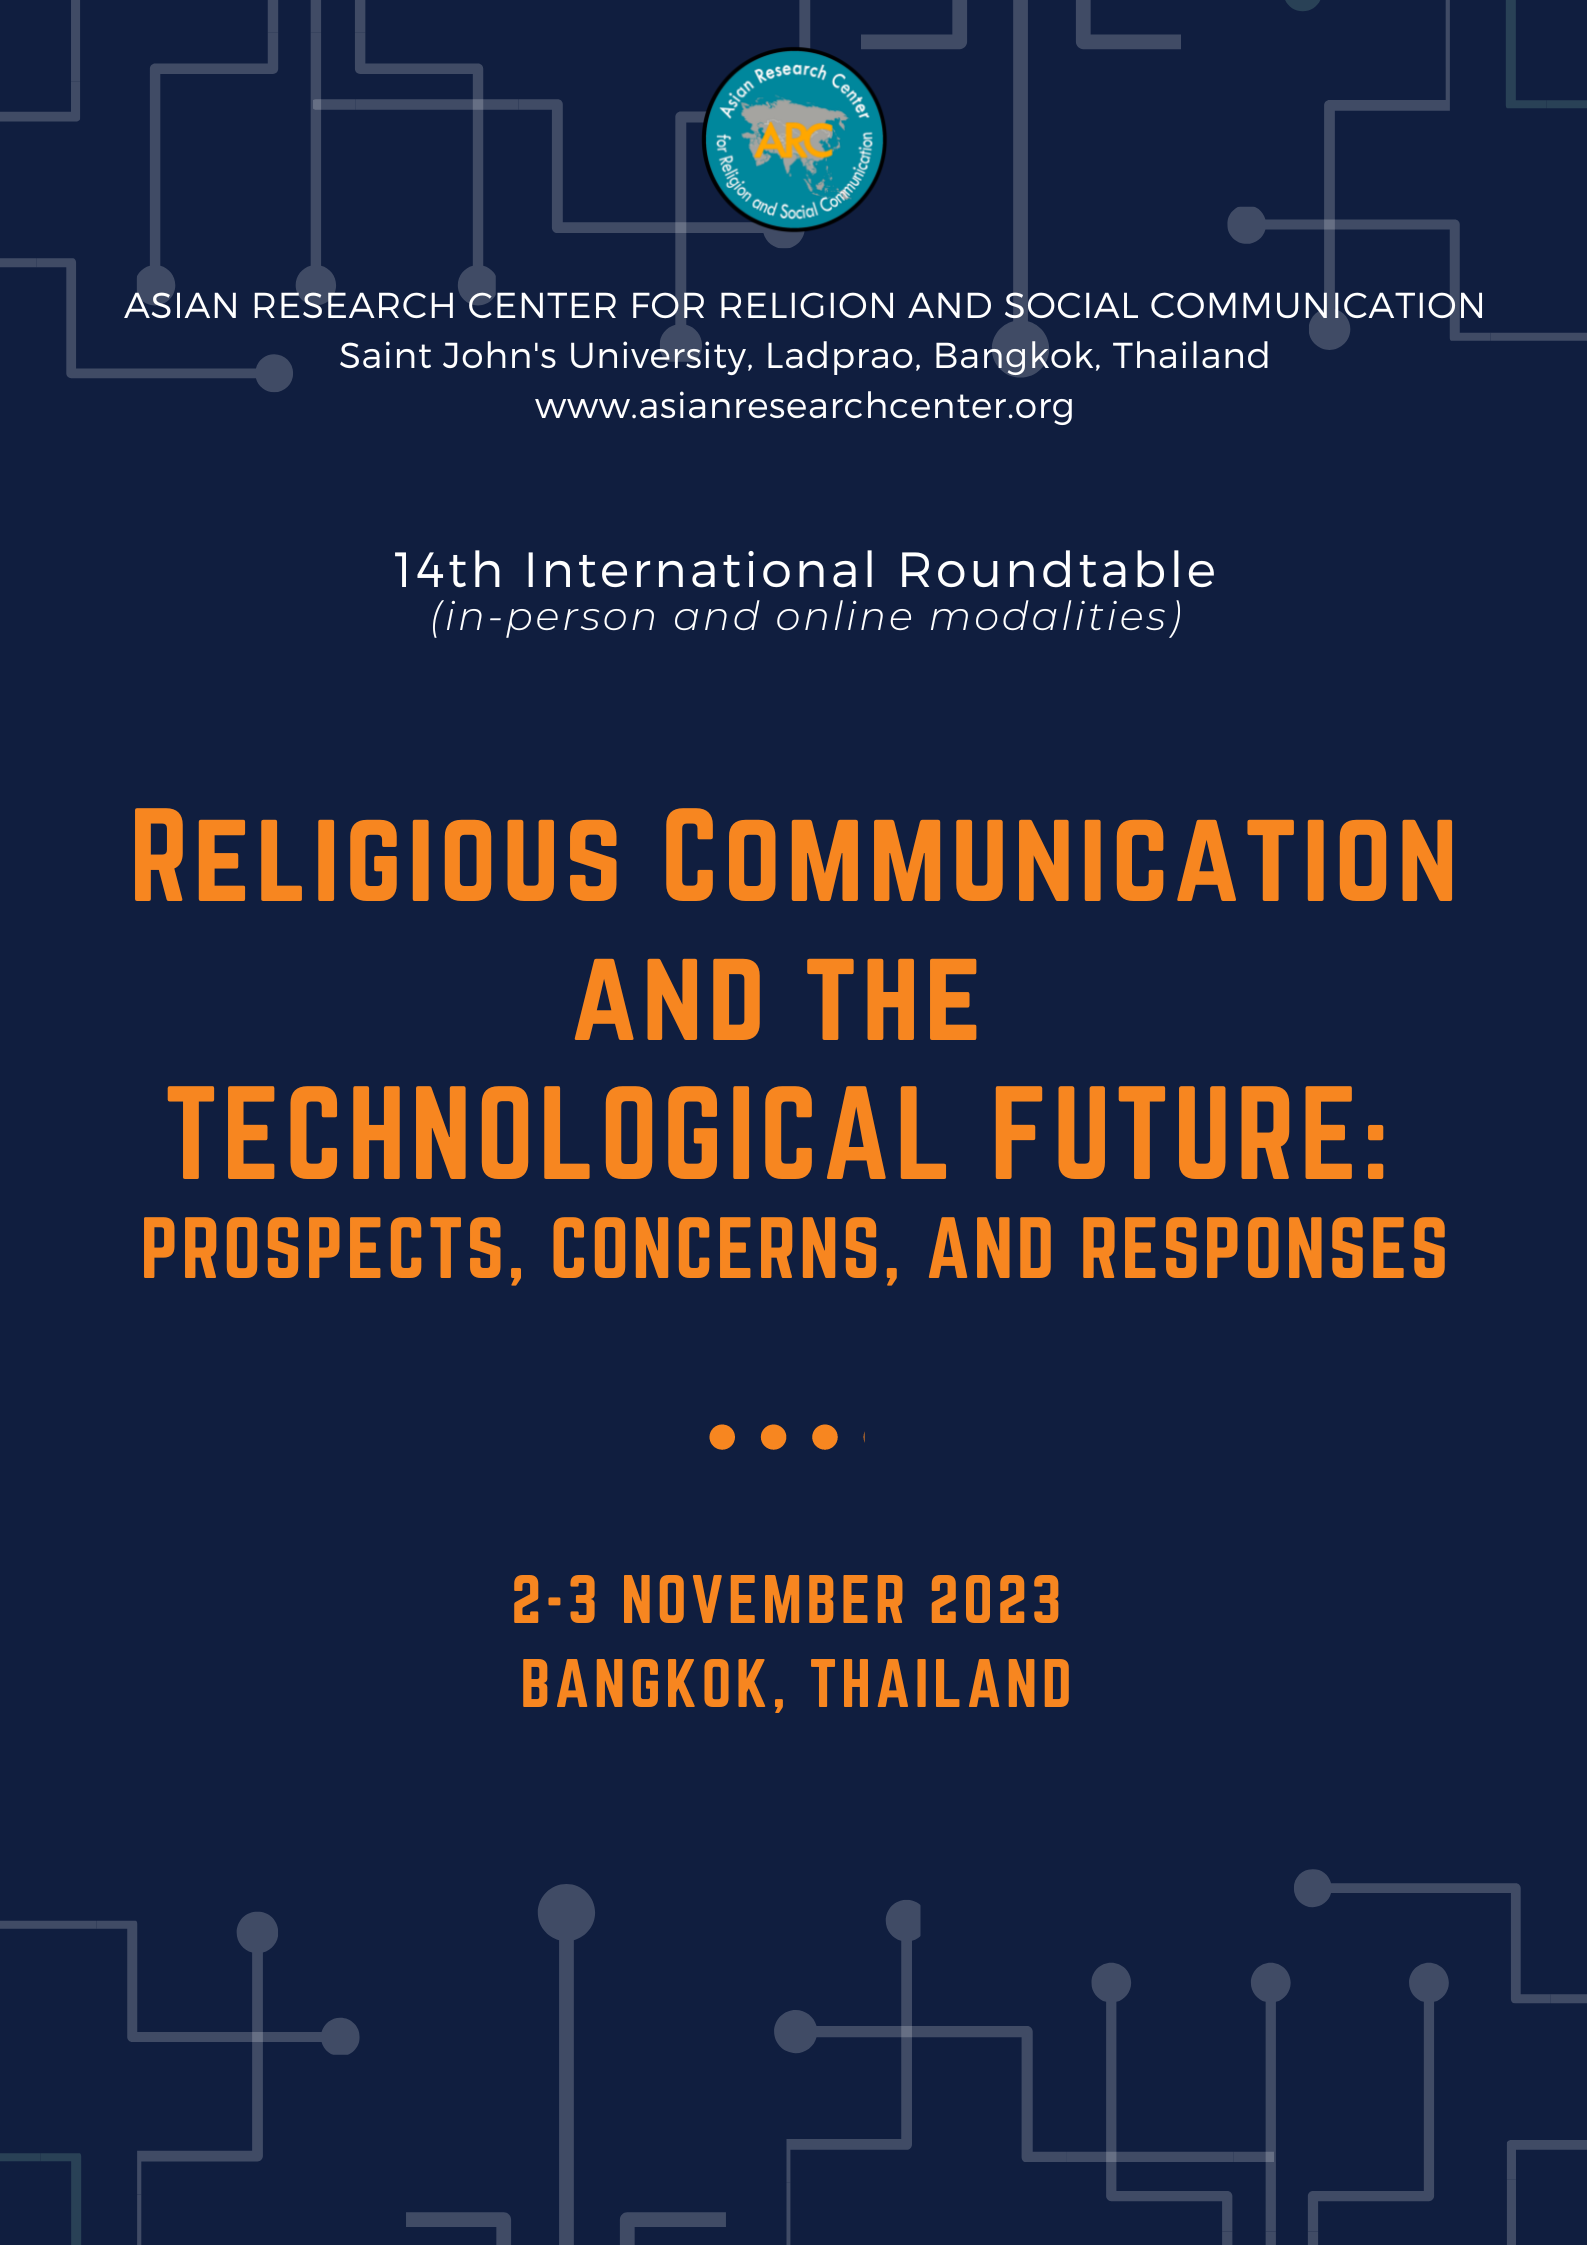 1673390058-religious-communication-and-the-technological-future-prospects-concerns-and-responses-3.png